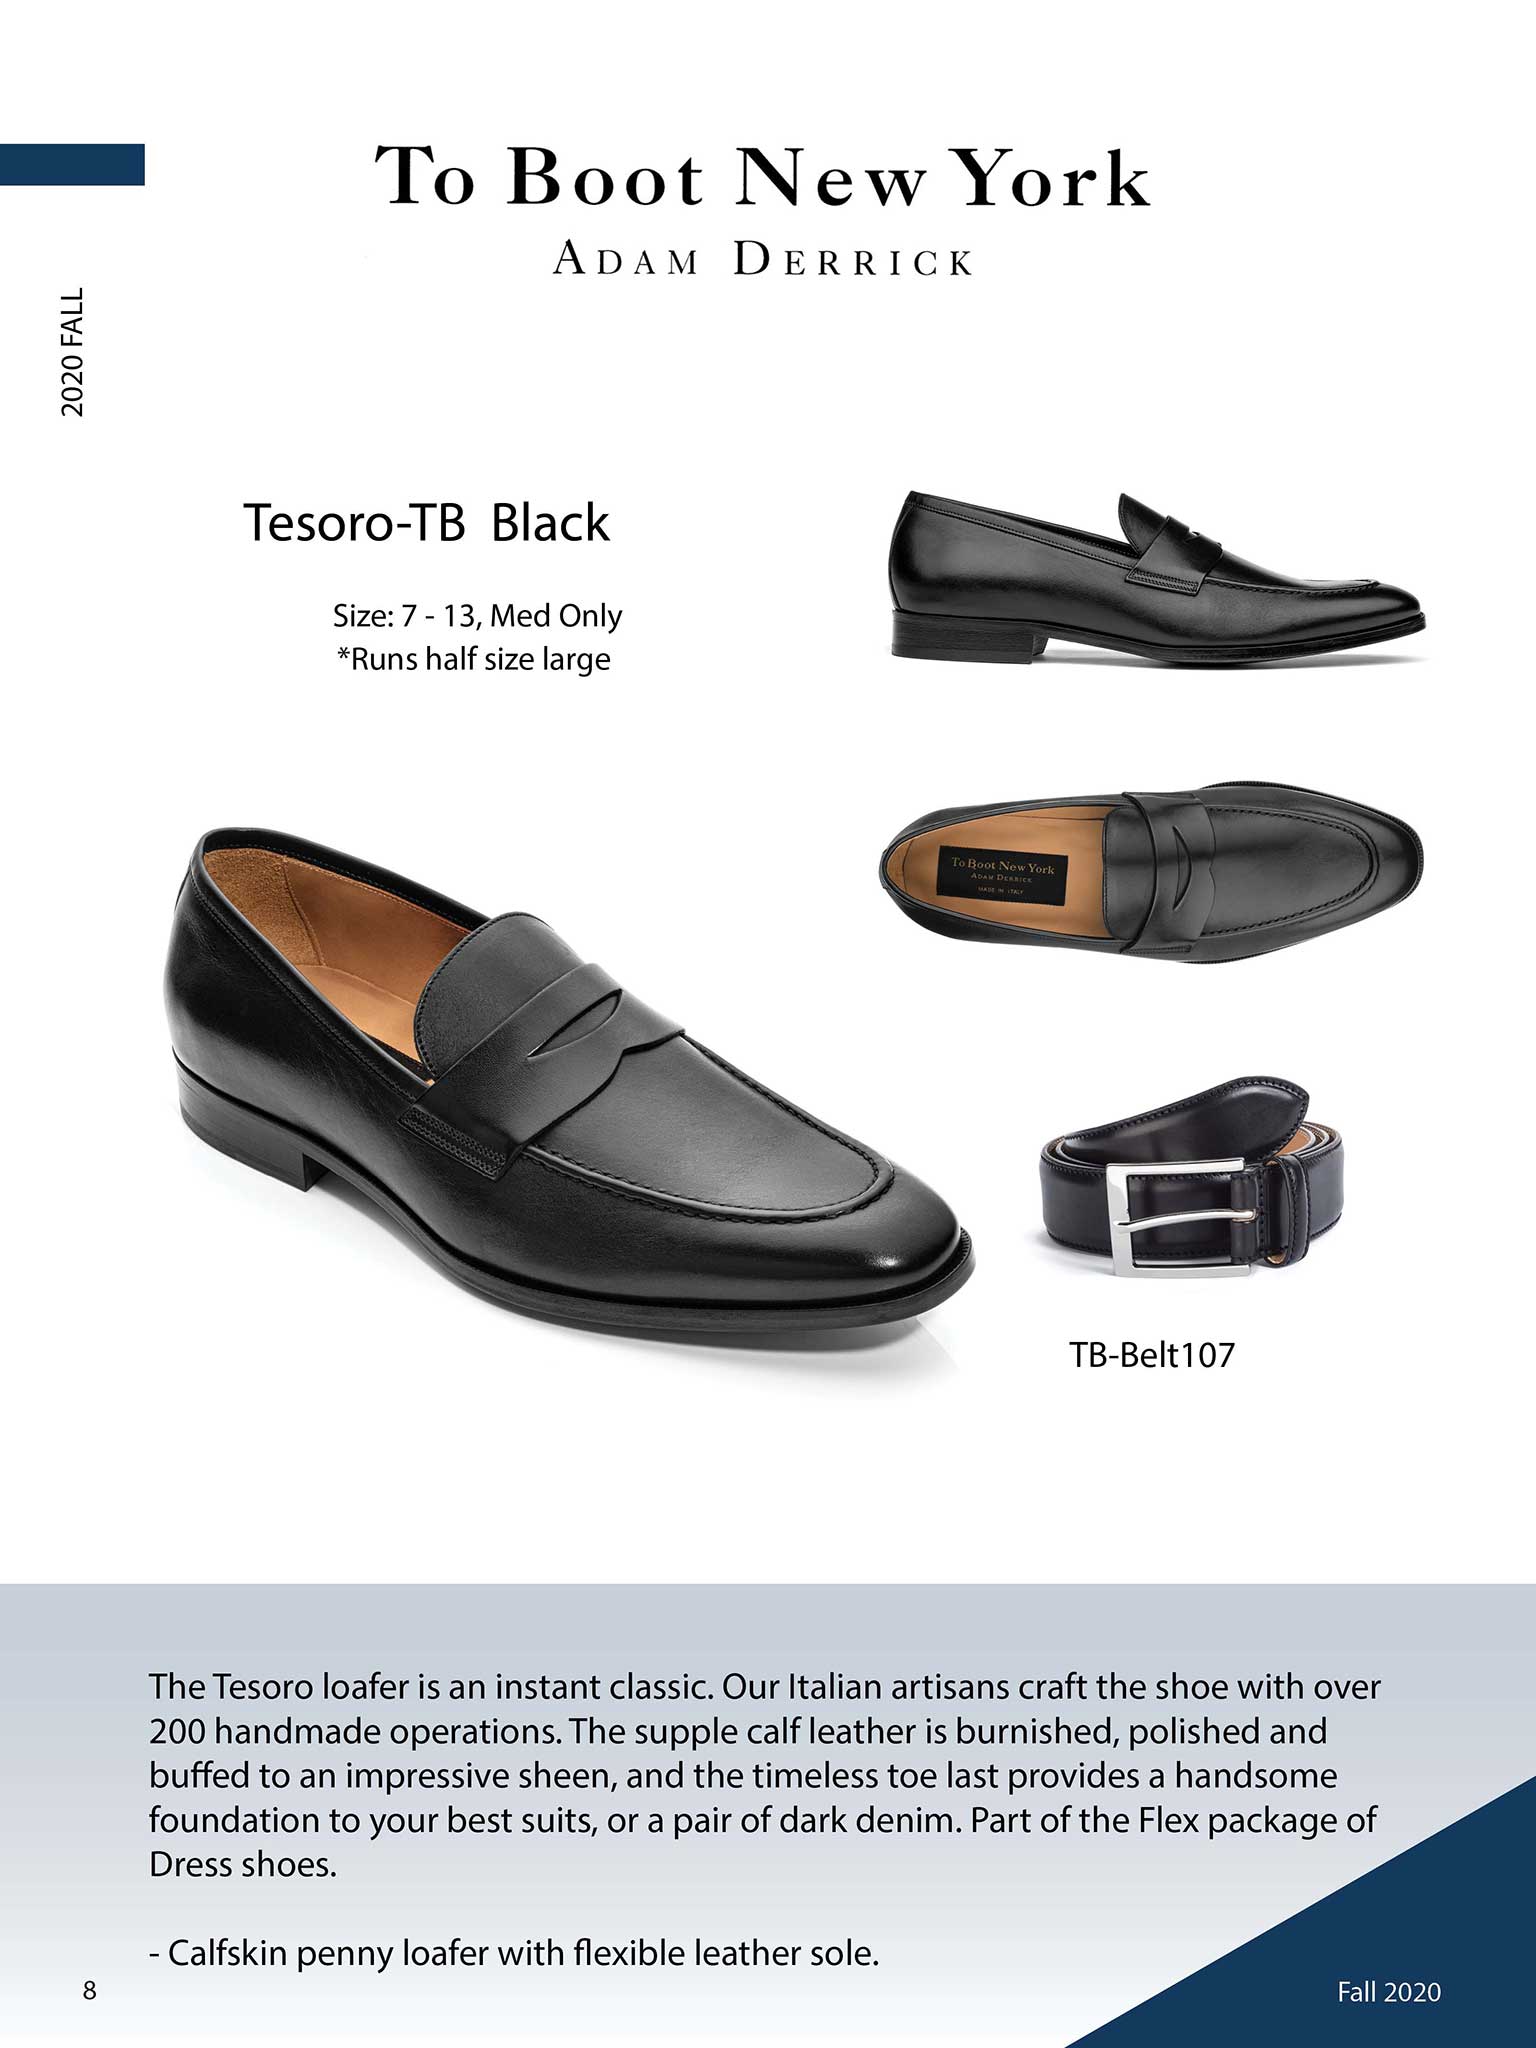 Tesoro in Black by To Boot New York